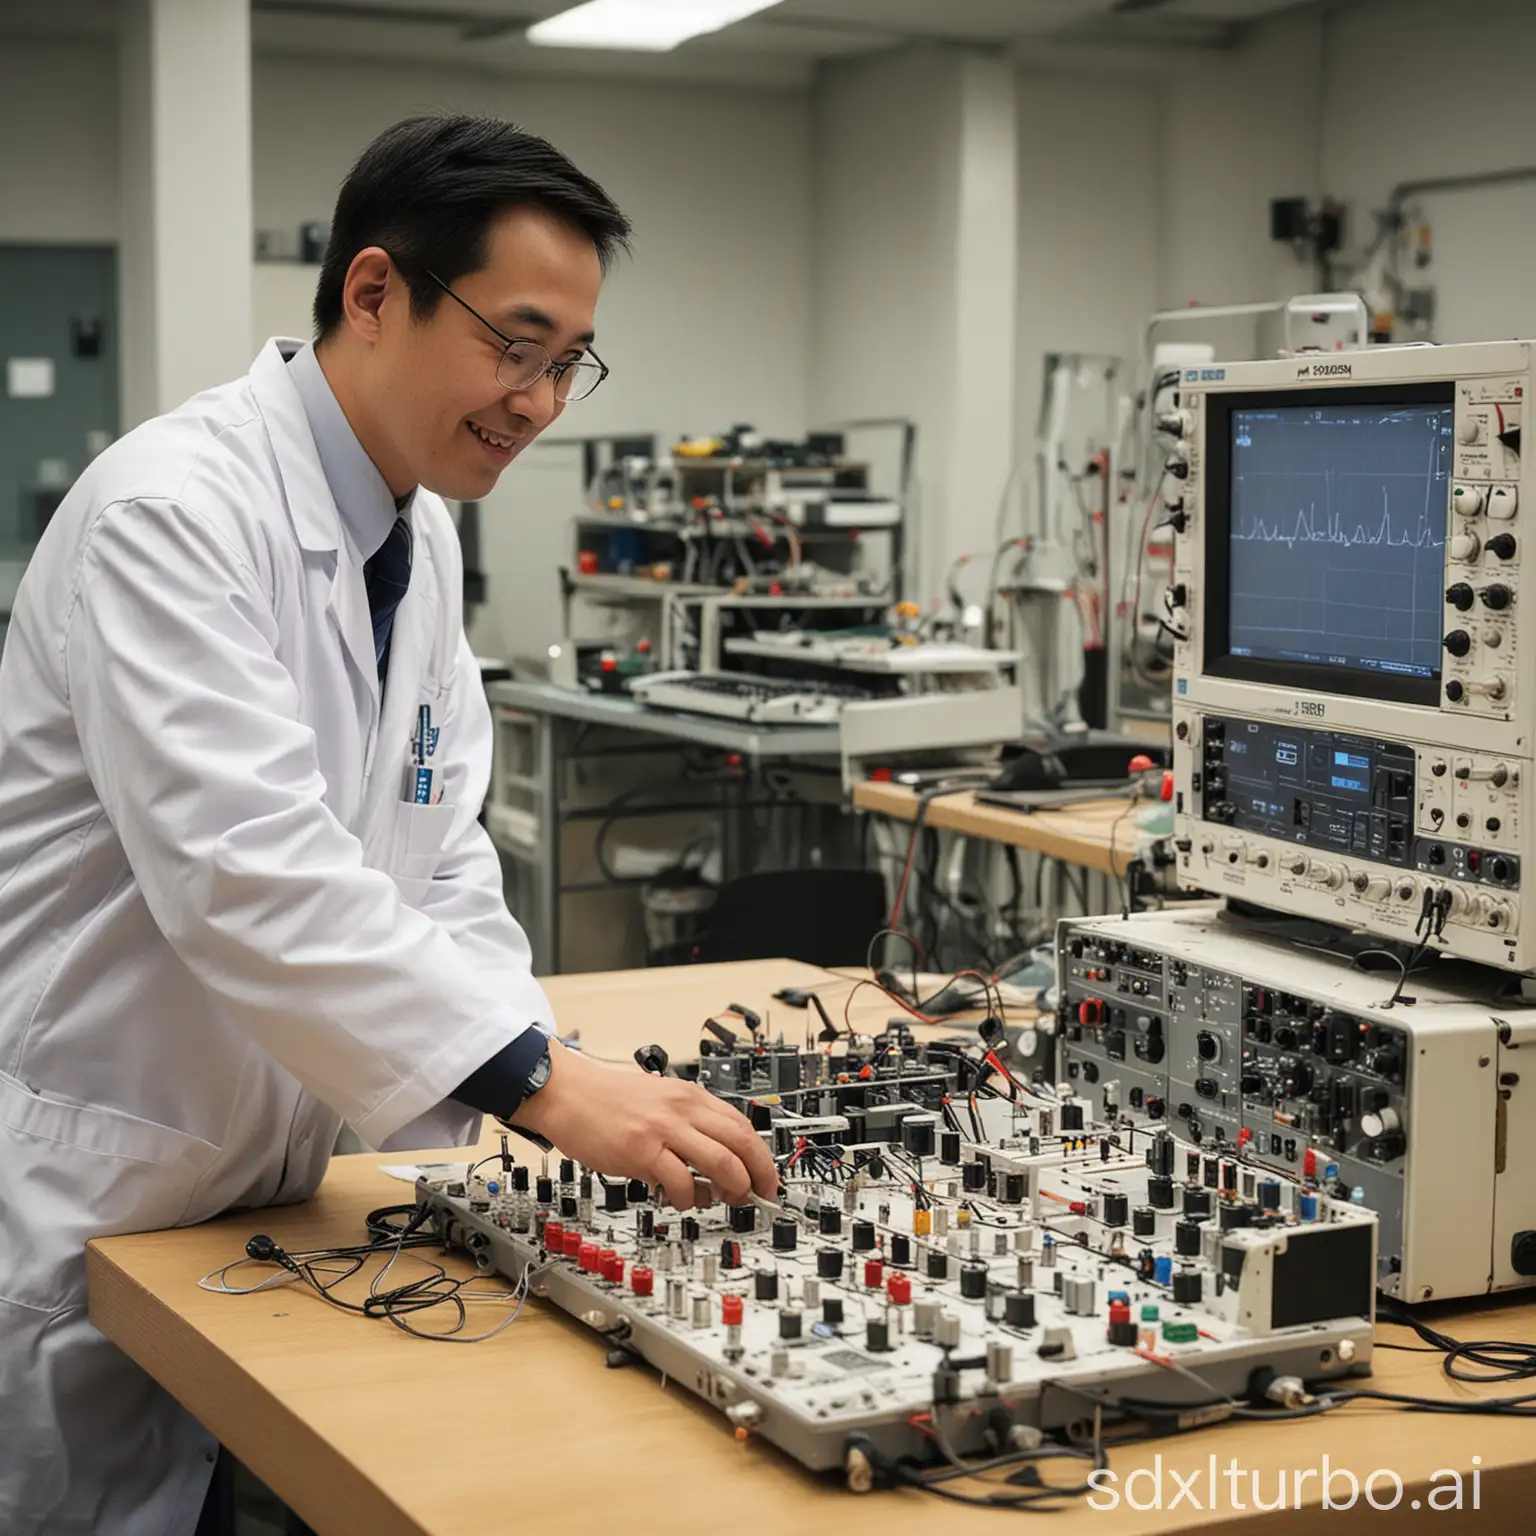 Middleaged-Chinese-Engineer-Demonstrating-Zero-Voltage-Switching-in-HighTech-Laboratory